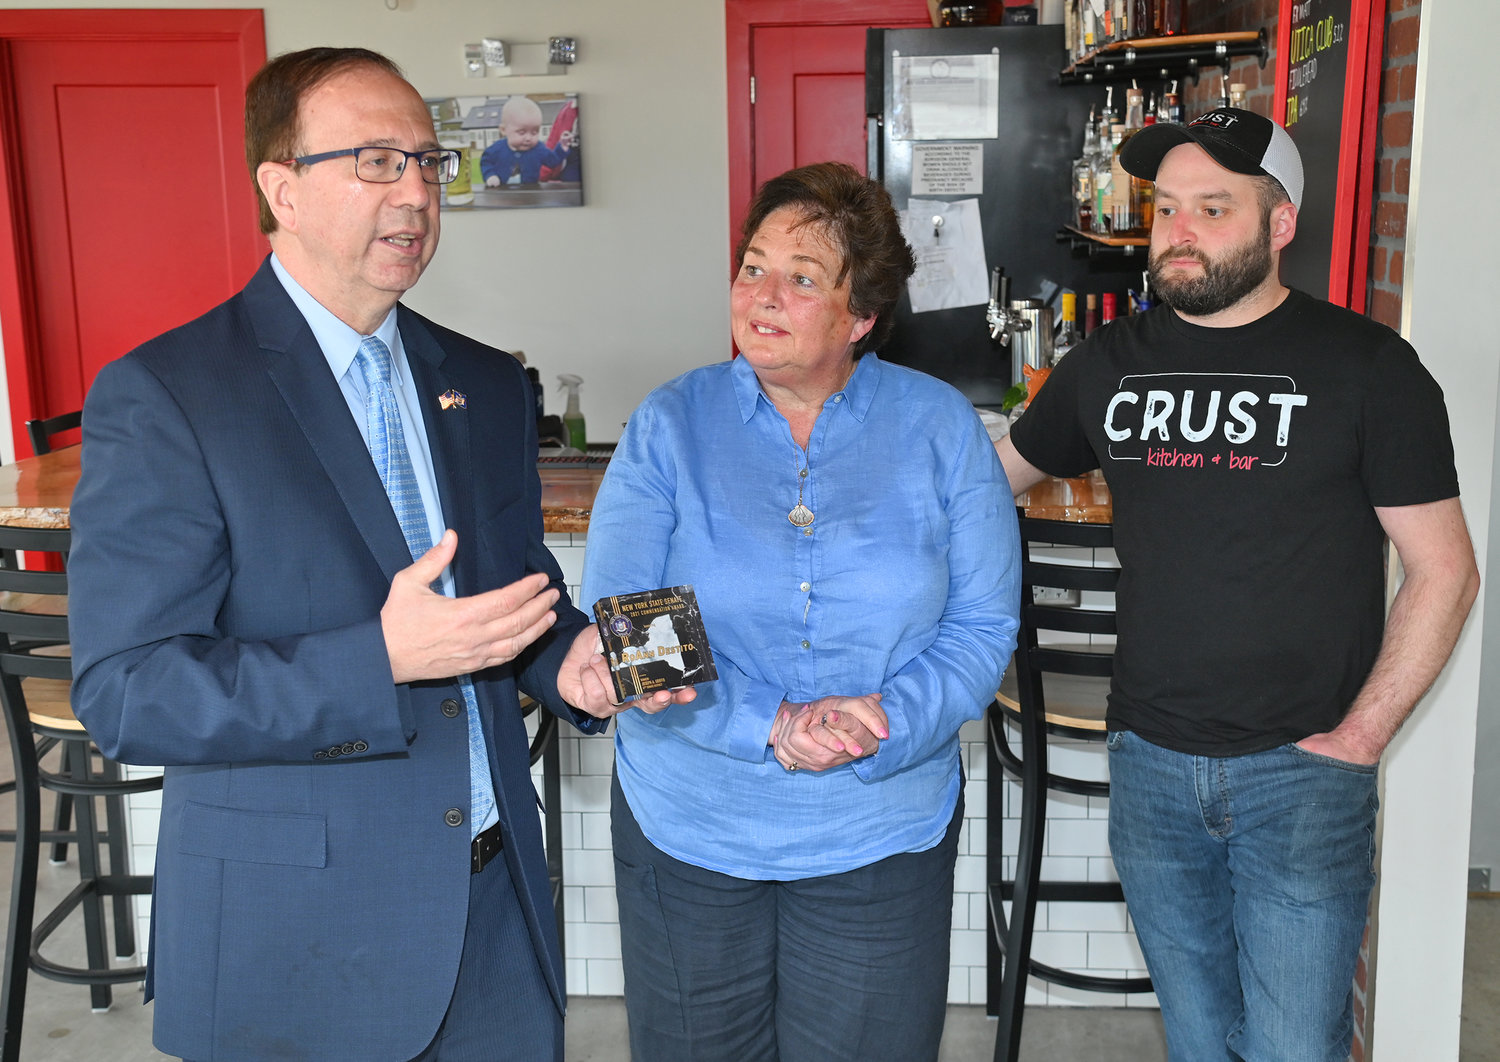 HONORED — State Sen. Joseph A. Griffo, R-47, Rome, presents a New York State Senate Commendation to RoAnn Destito, center, while her son, Christopher Destito, looks on. The commendation, presented in a ceremony at the Crust Kitchen and Bar, 86 Hangar Road West, honors the former assemblywoman and Office of General Services commissioner for her longtime career in public service.